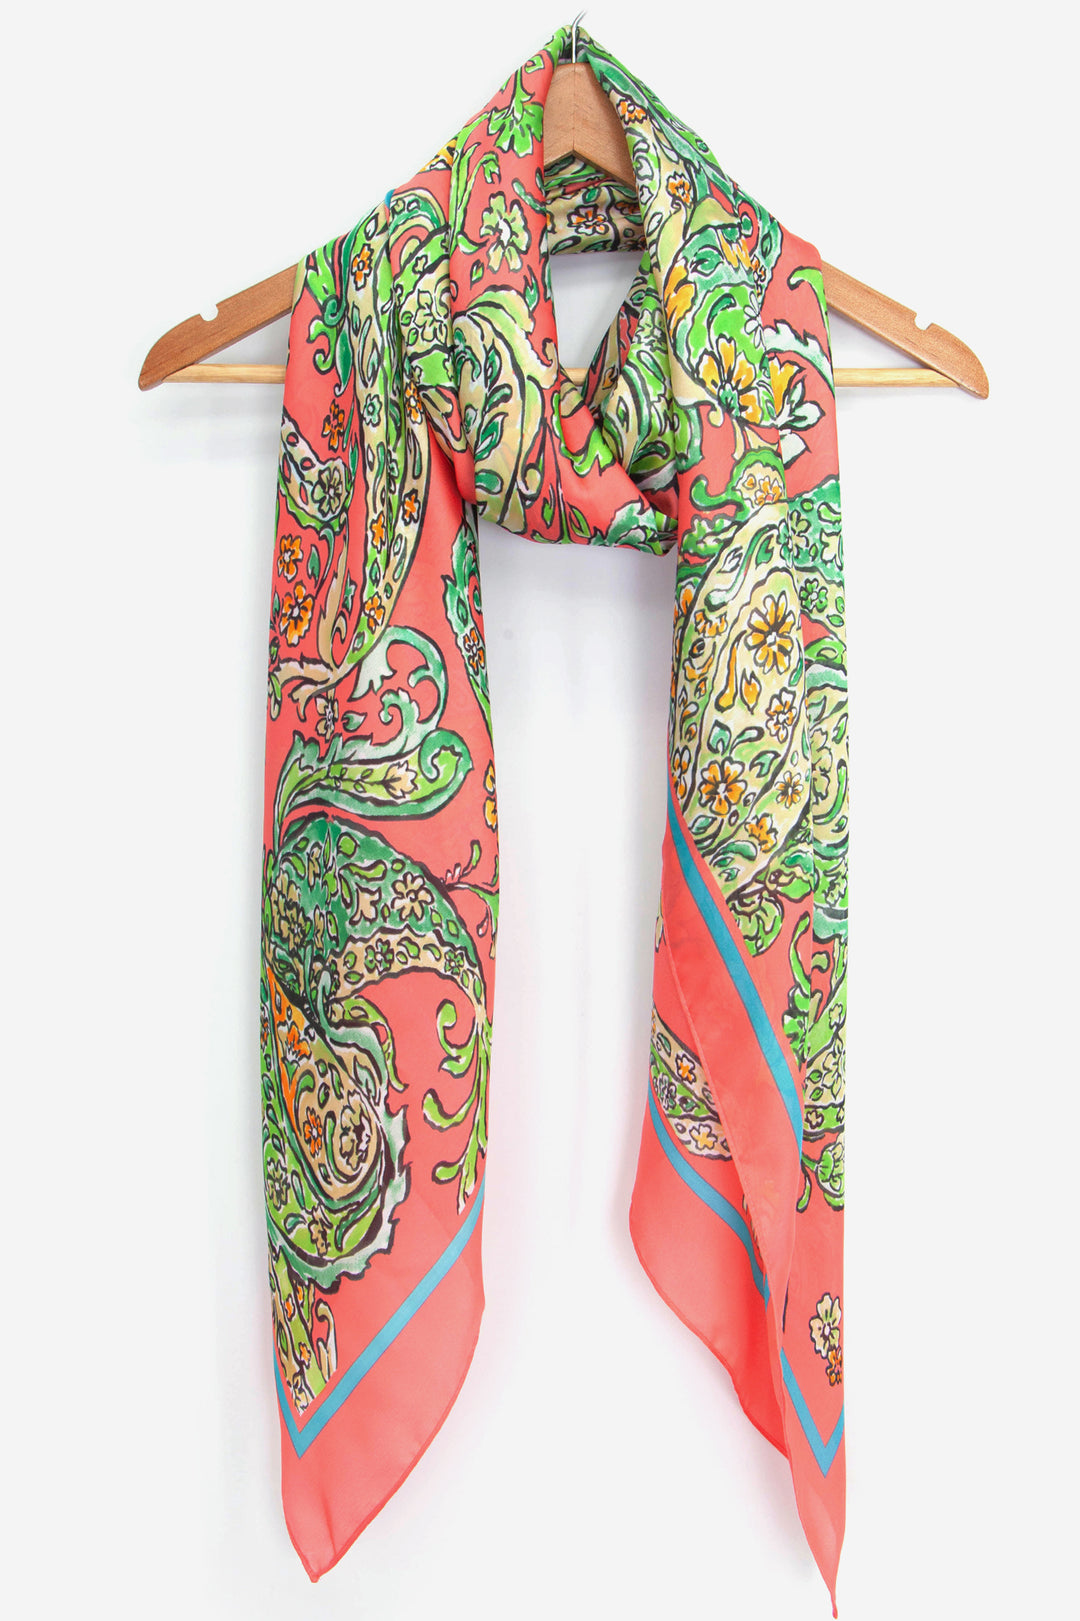 coral paisley pattern scarf wrapped around a coat hanger, showing the ornate paisley floral design on this silky scarf